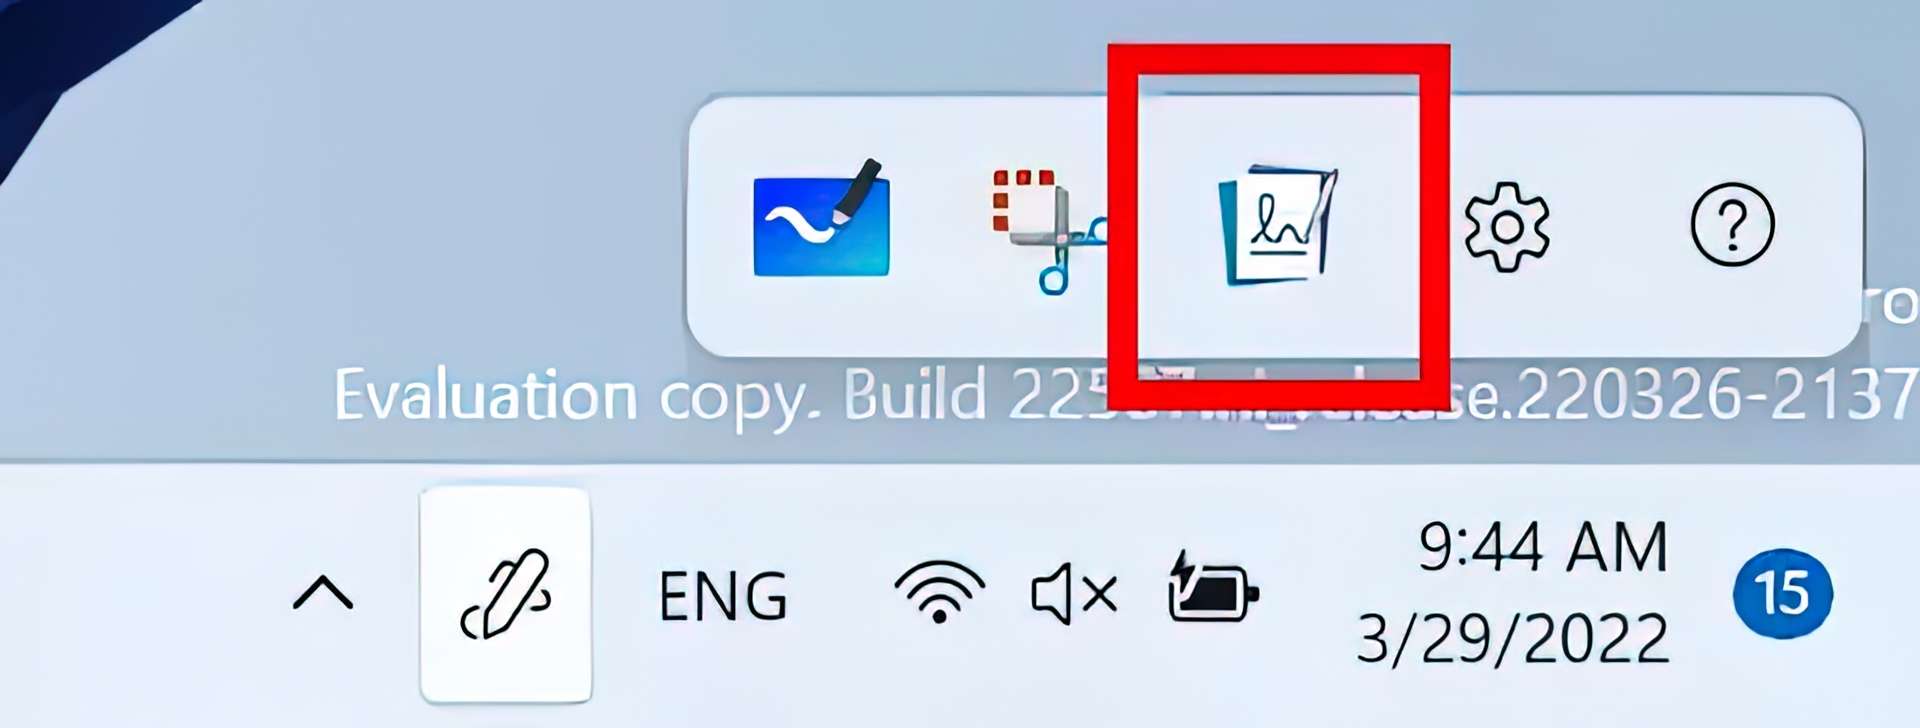 Windows 11 22h2 features